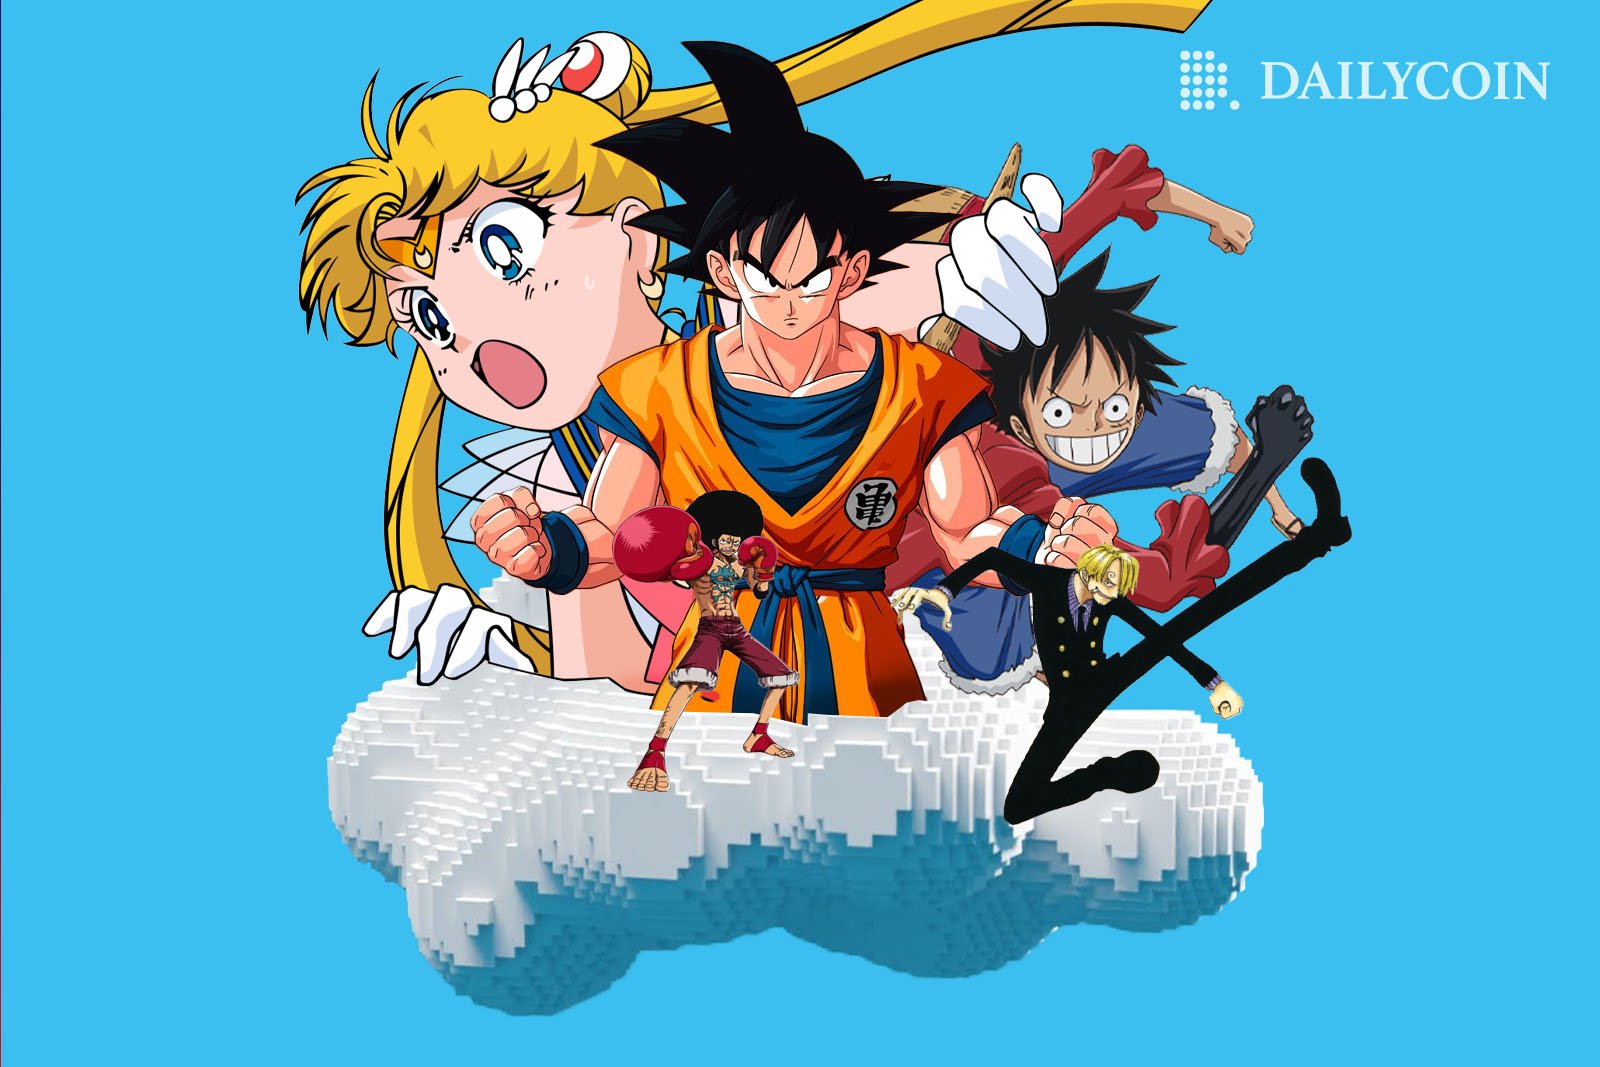 The Sandbox Celebrates Partnership with Dragon Ball and One Piece Animators  in NFT Giveaway - DailyCoin